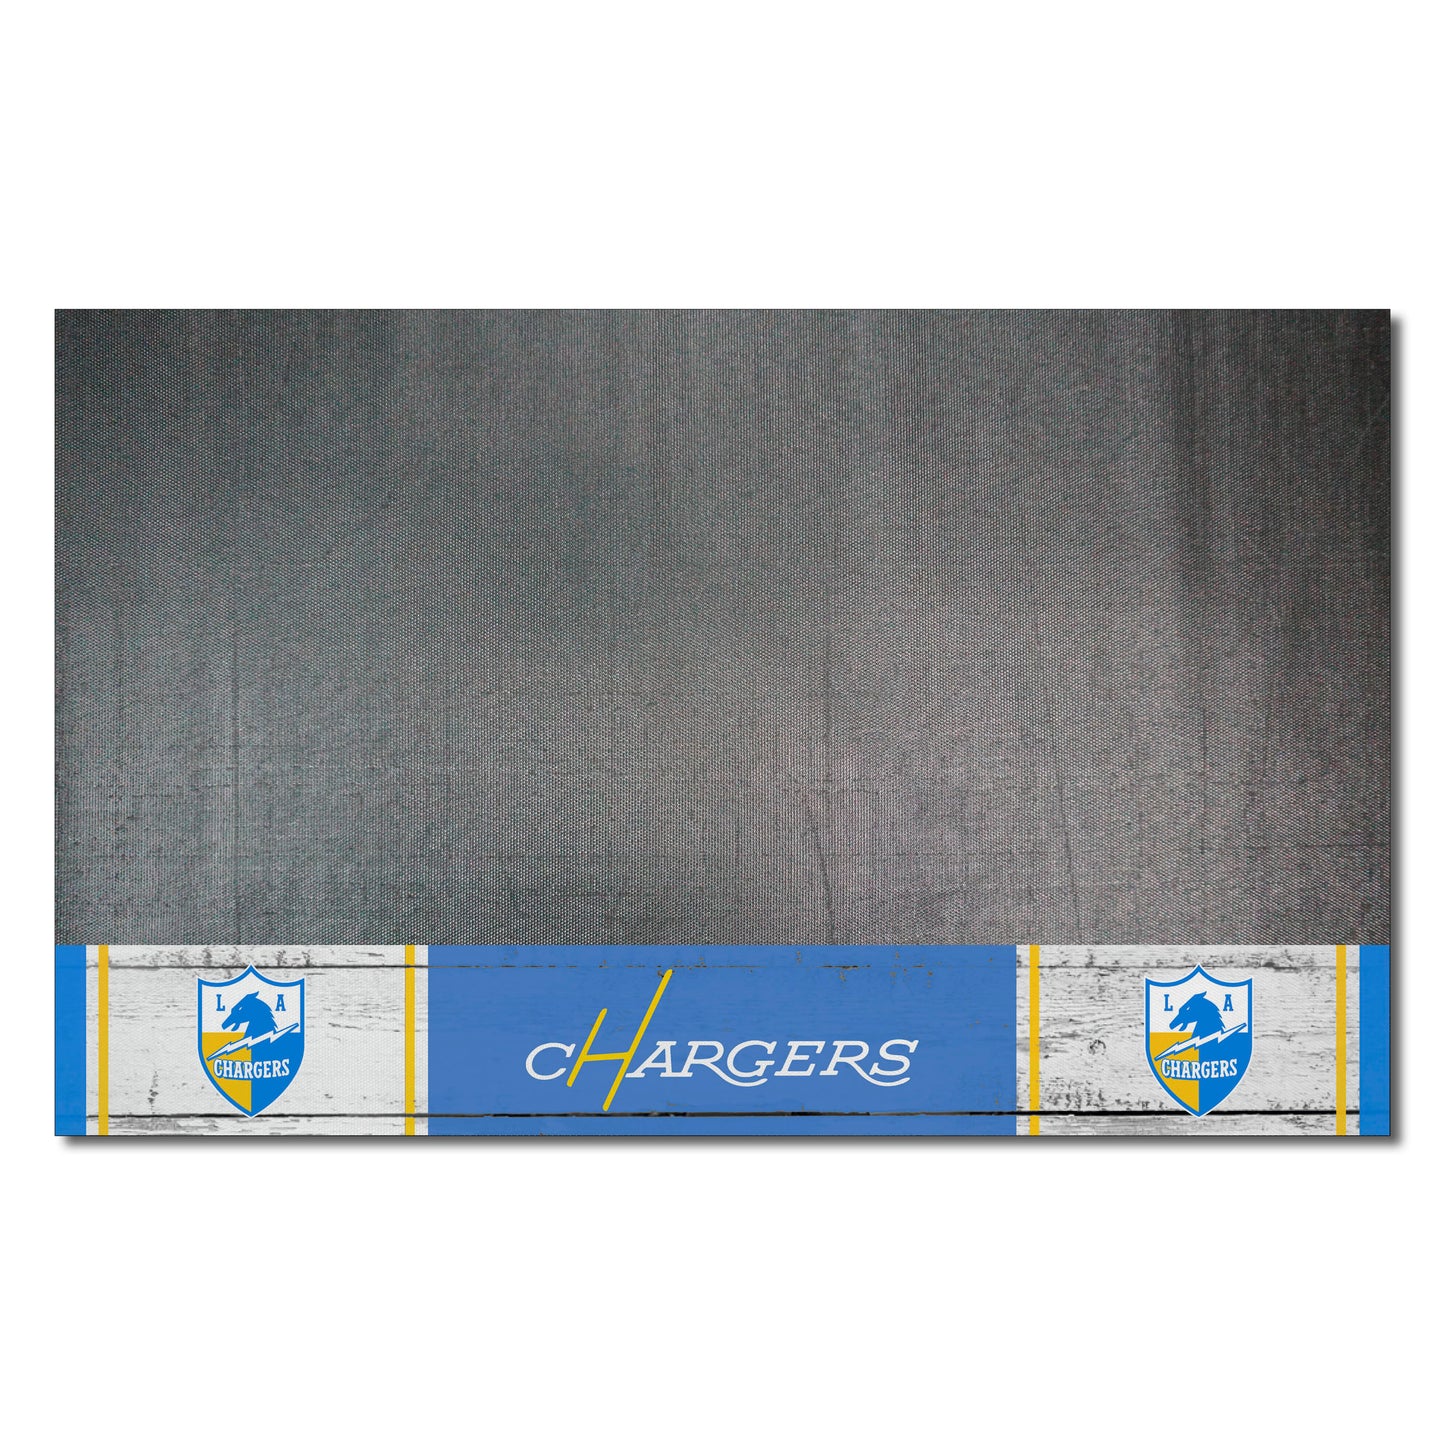 Los Angeles Chargers Vinyl Grill Mat - 26in. x 42in.NFL Retro Logo, Chargers Shield Logo